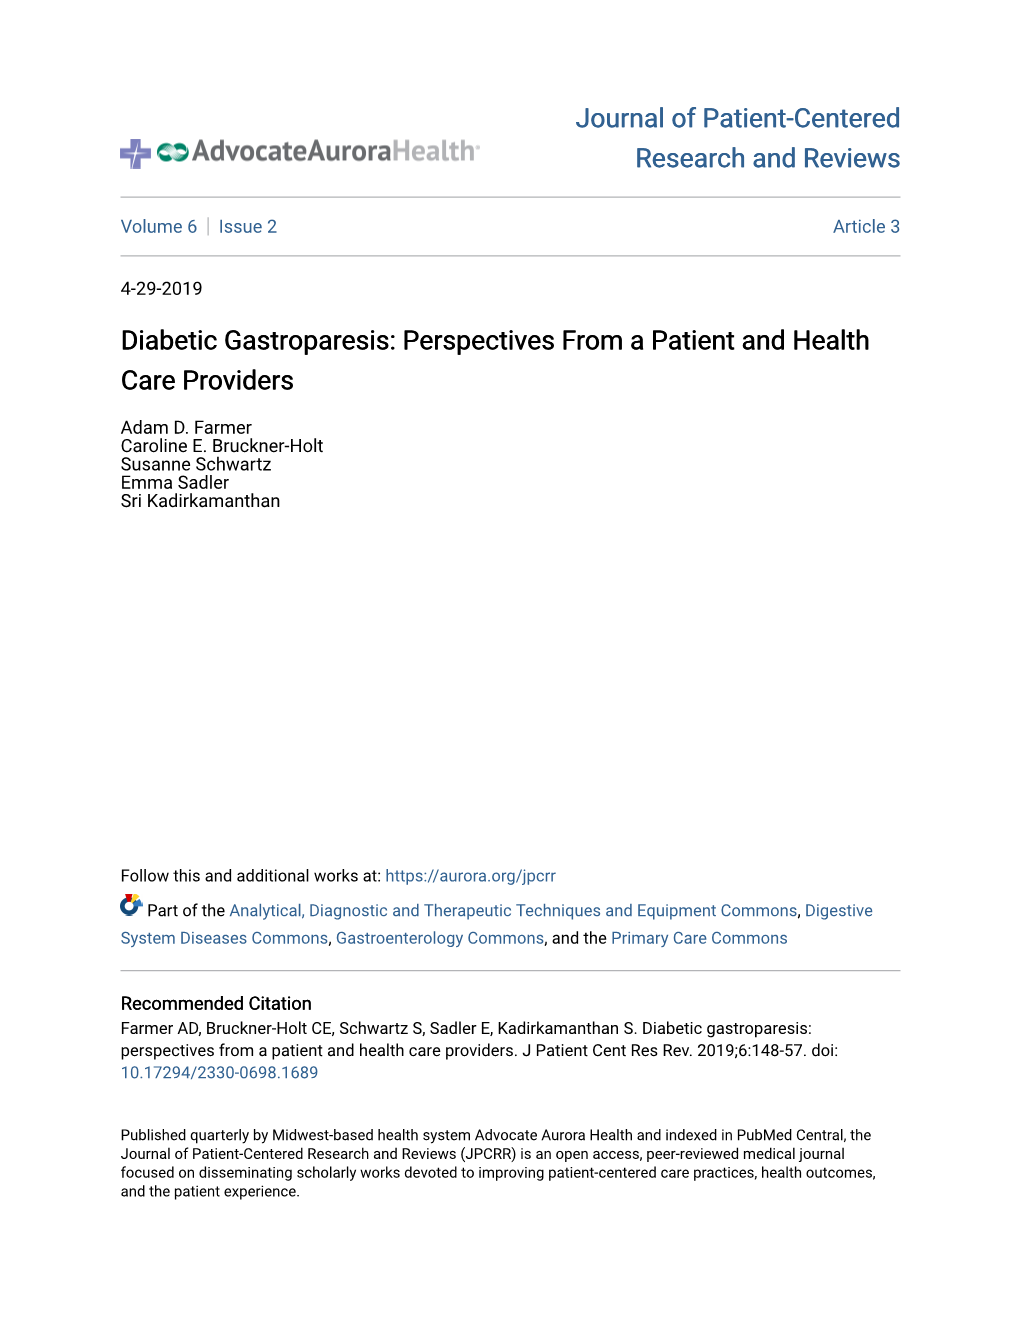 Diabetic Gastroparesis: Perspectives from a Patient and Health Care Providers